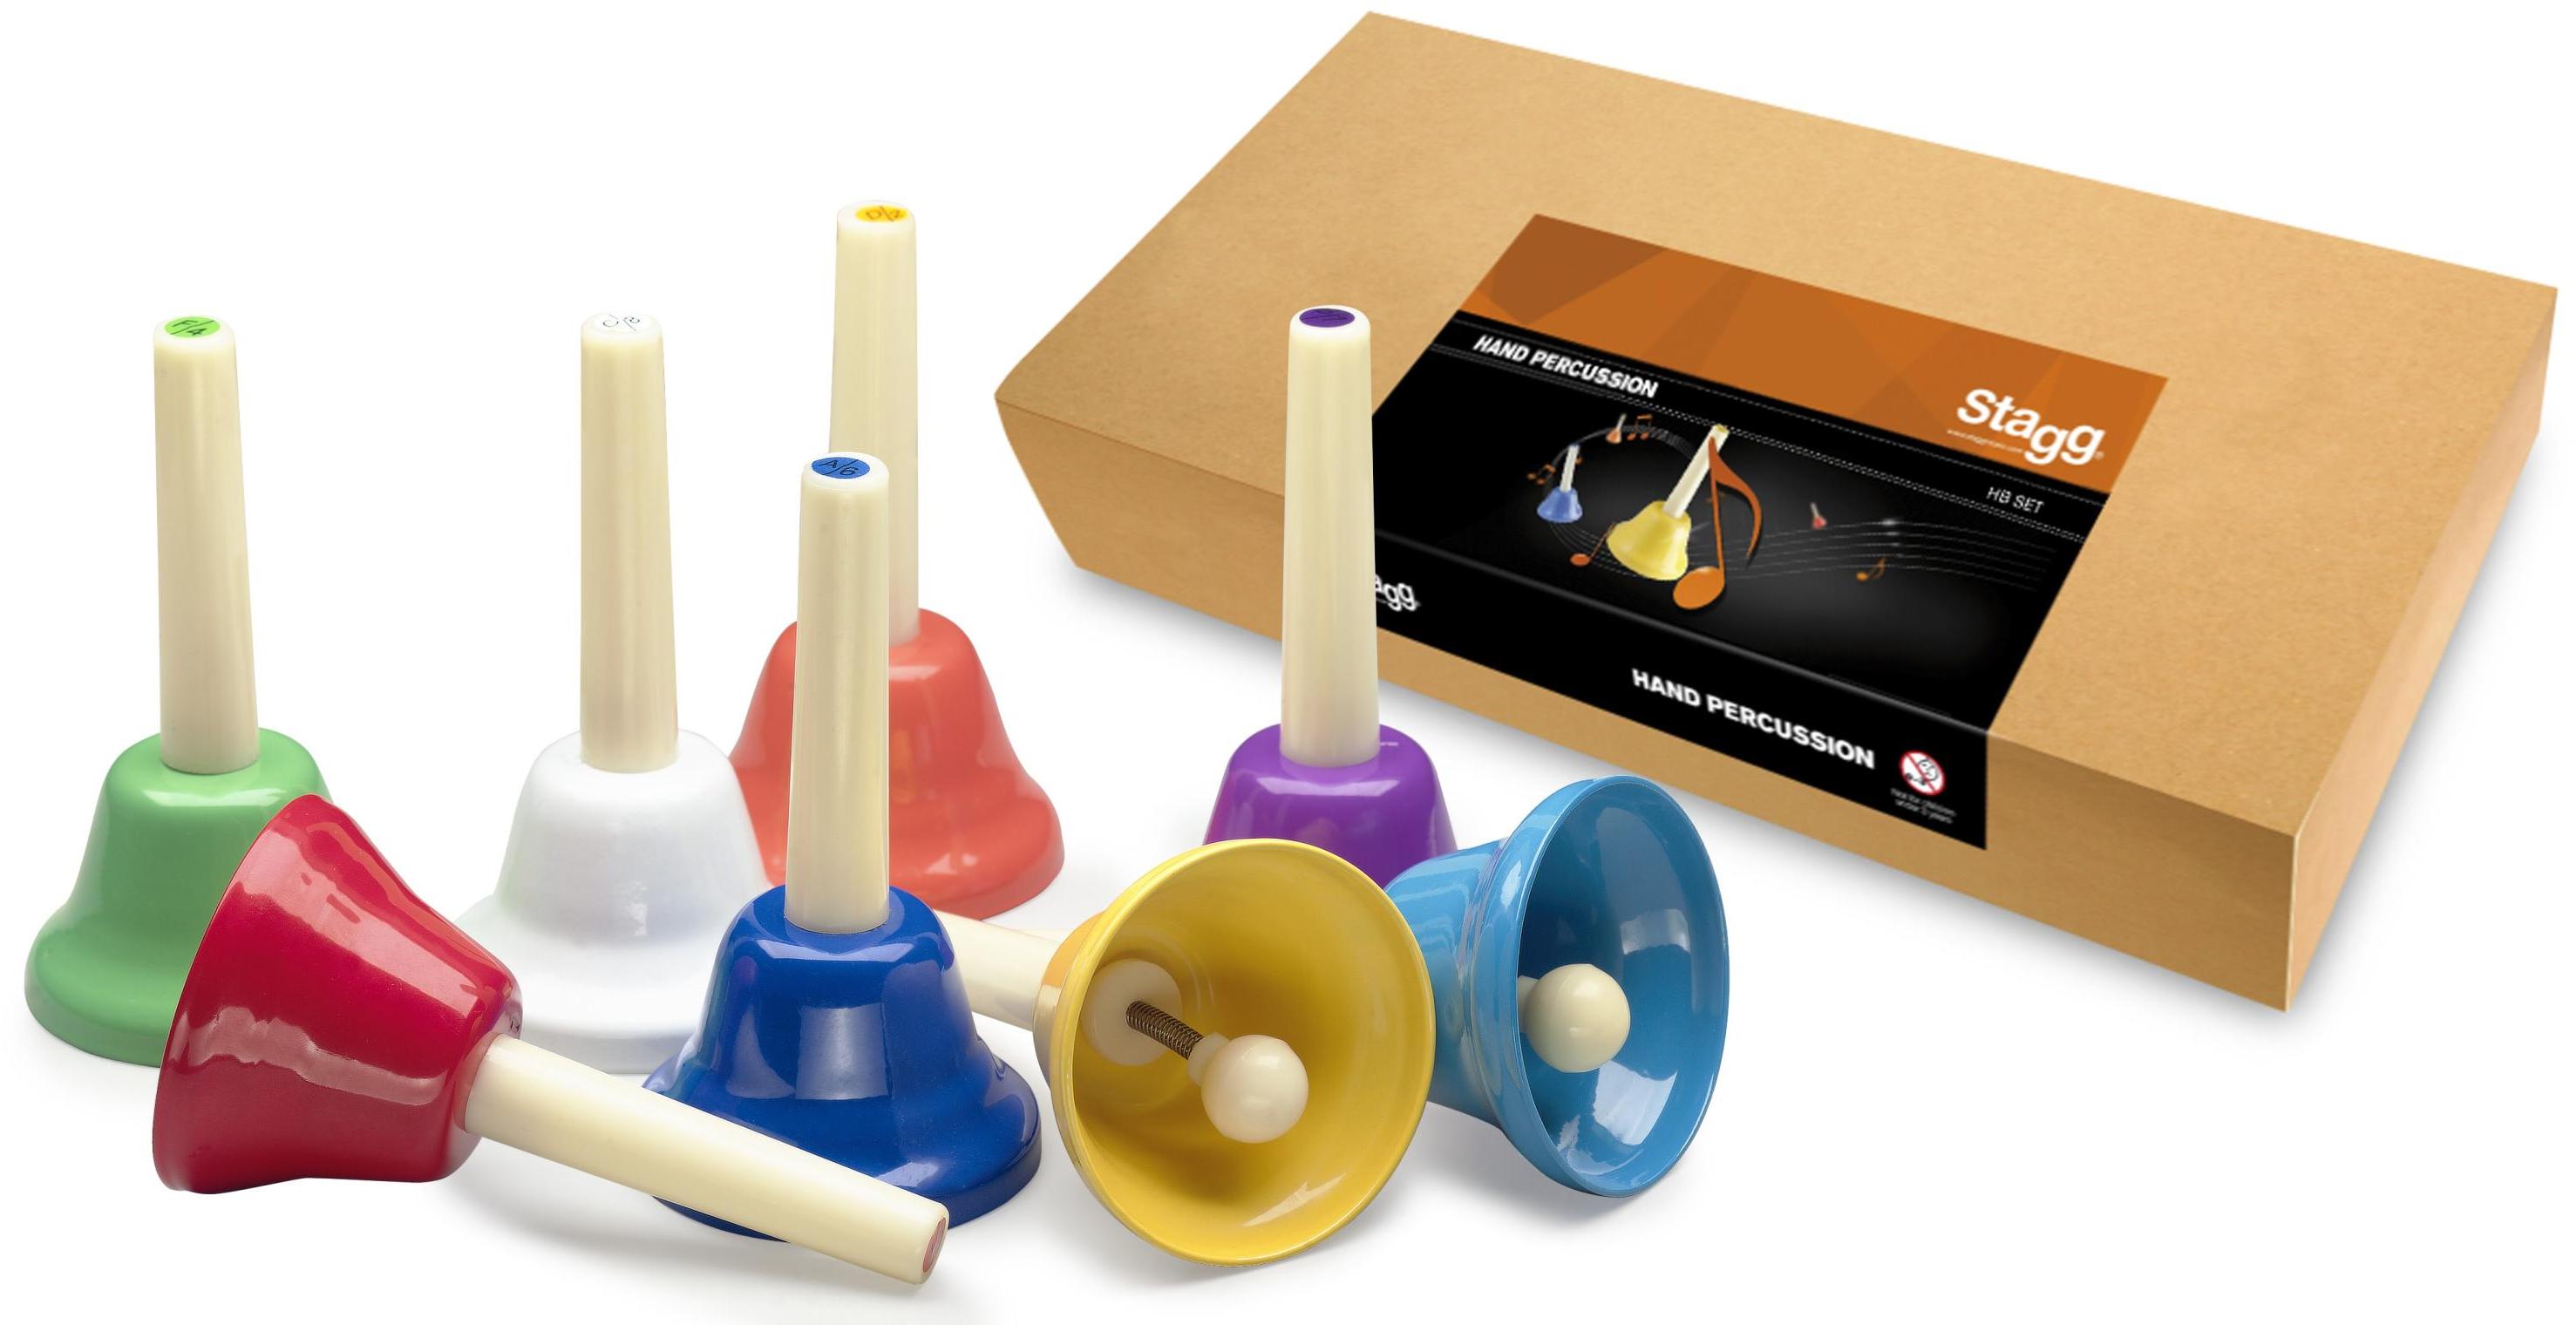 Shake percussions Stagg 8 notes handbell st